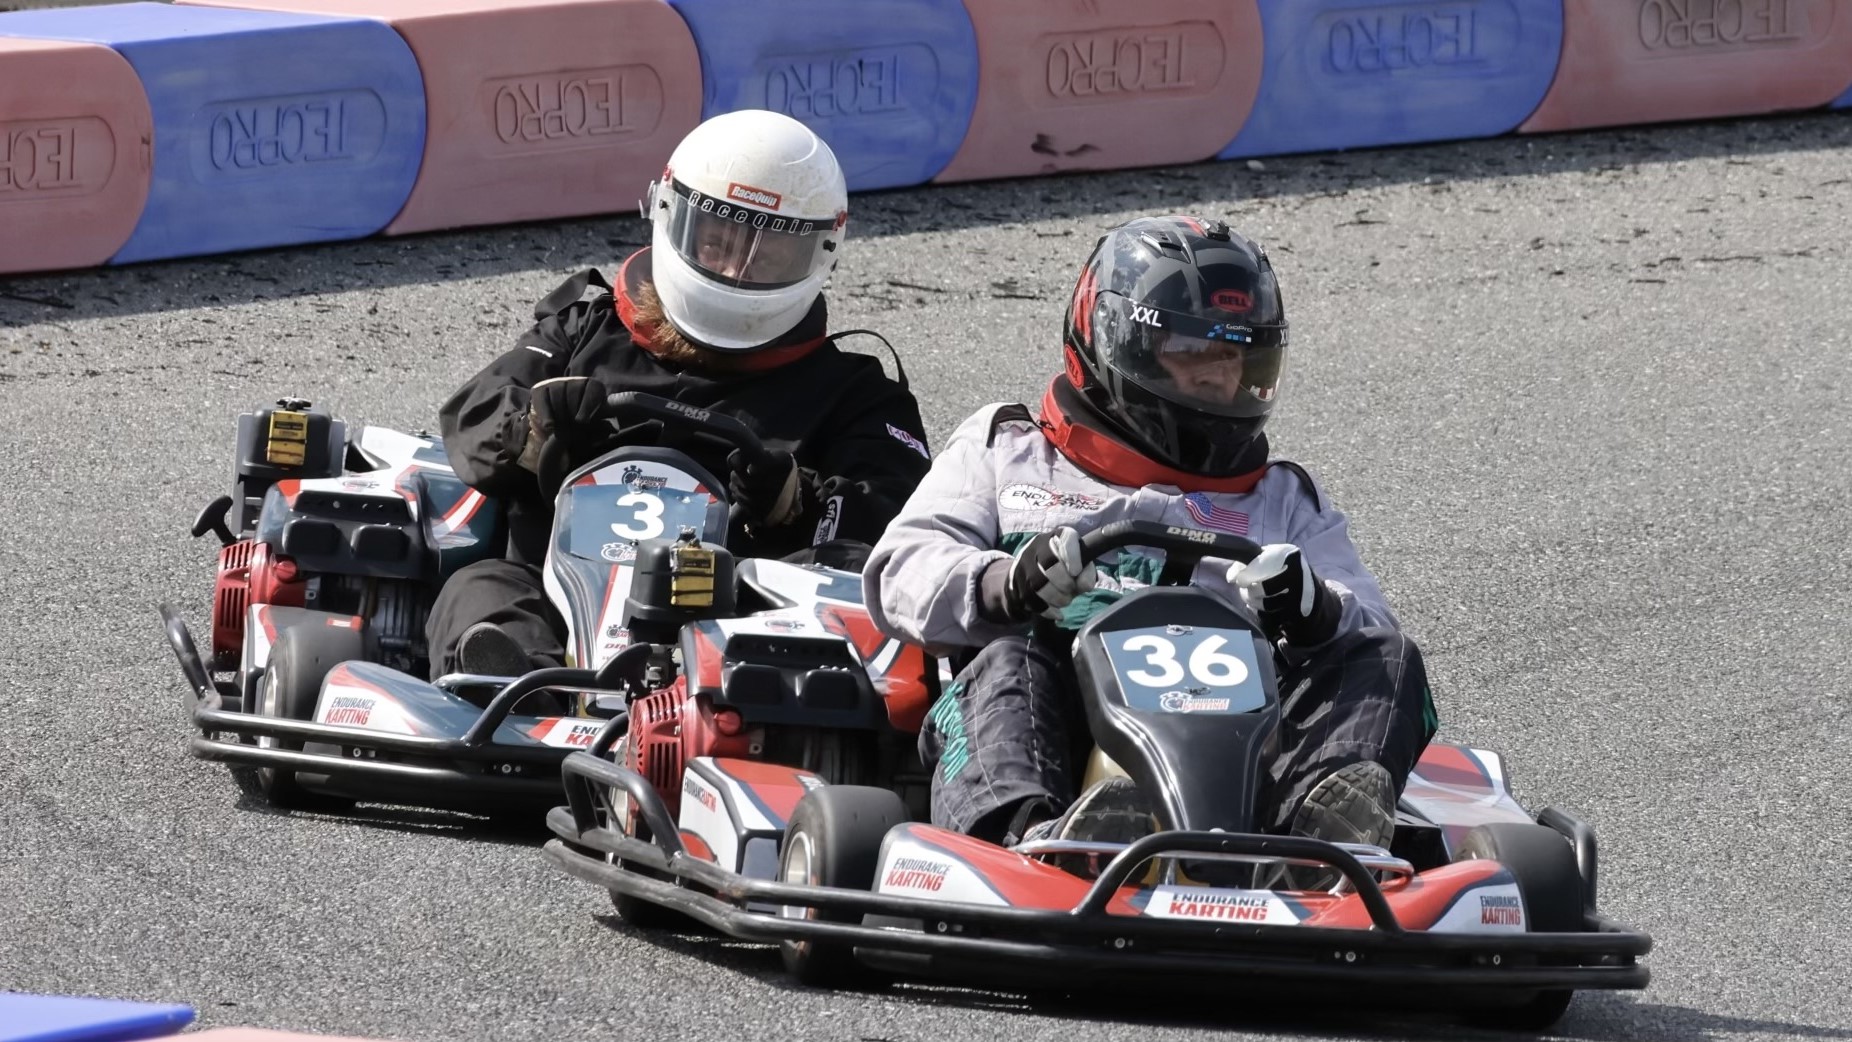 Go-kart teams will compete wheel to wheel Saturday at the 22nd Jacksonville Grand Prix to benefit Spina Bifida of Jacksonville. | Spina Bifida of Jacksonville